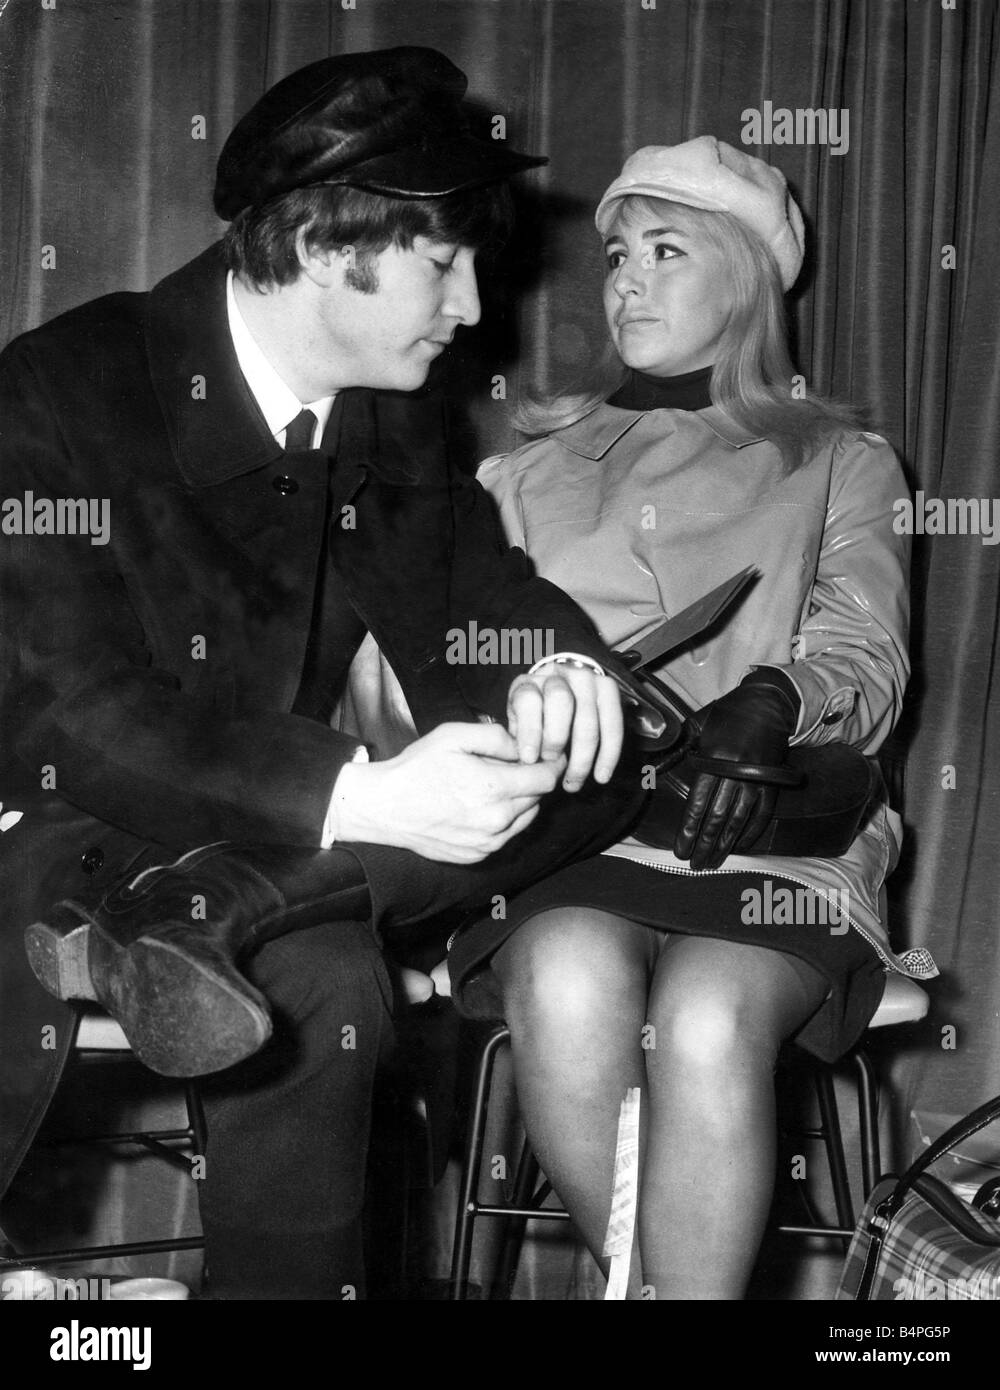 The Beatles John Lennon pictured with his wife Cynthia in the lounge of ...